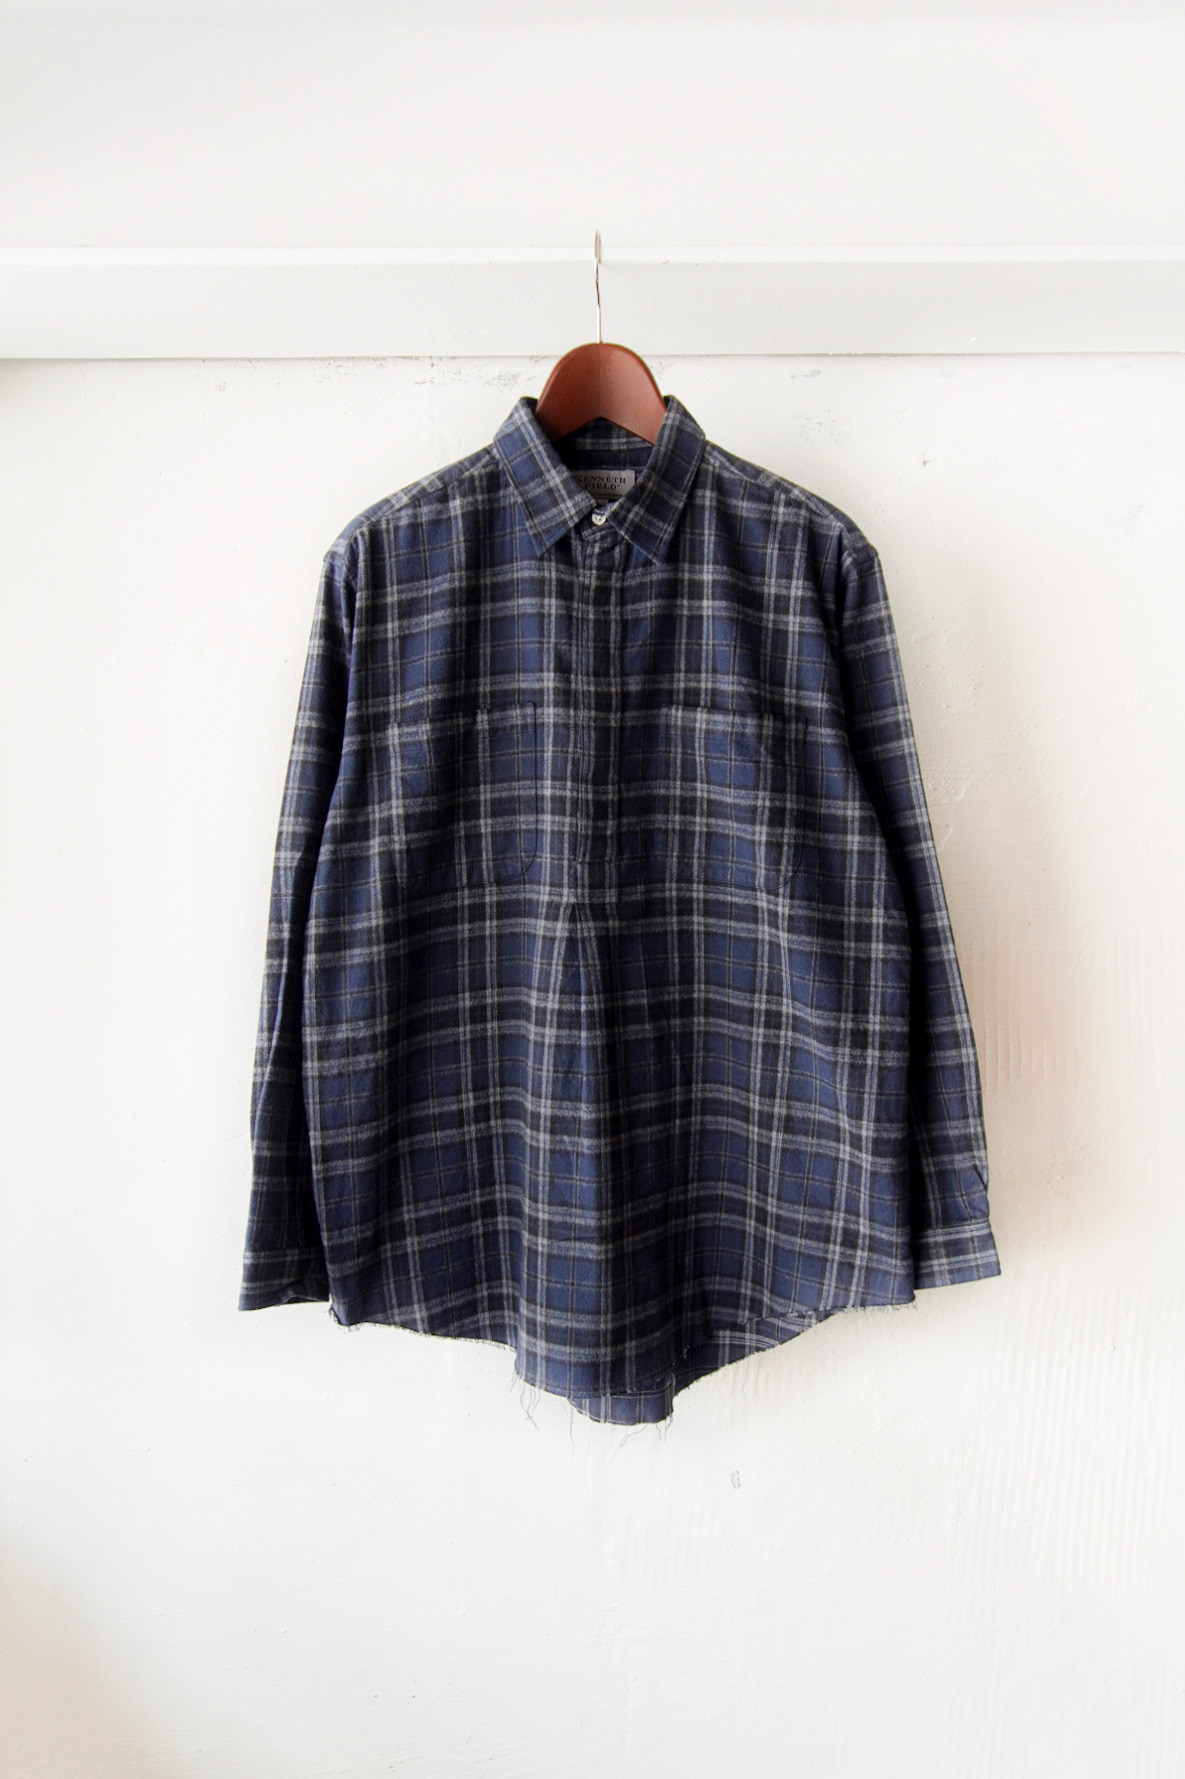 [KENNETH FIELD] Roomy Shirt - Flannel Check Navy